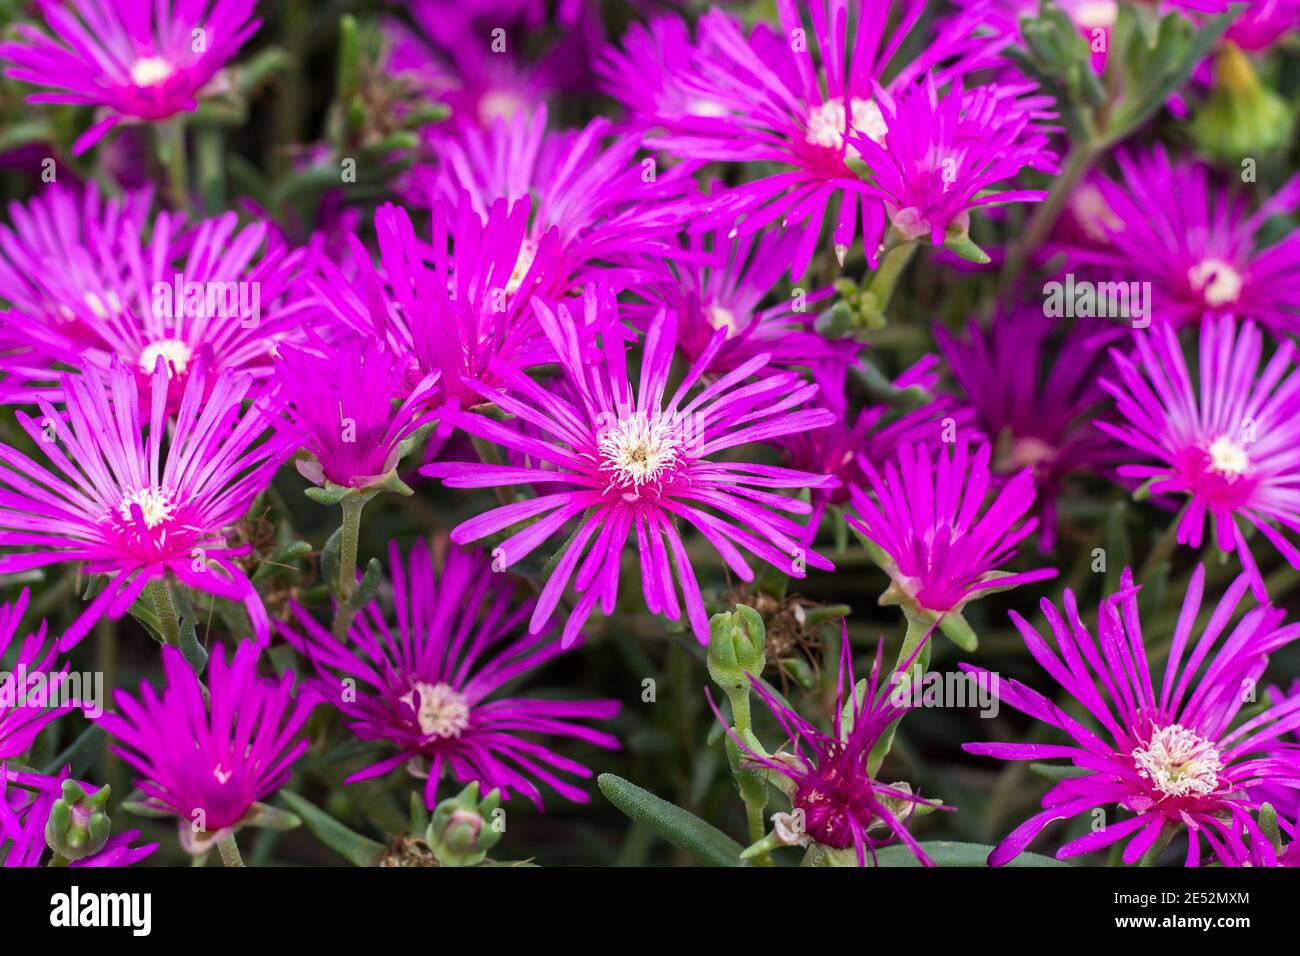 Close-up of Georgia Aster flowers, Symphyotrichum georgianum, is a rare flowering plant of the Compositae family. Stock Photo